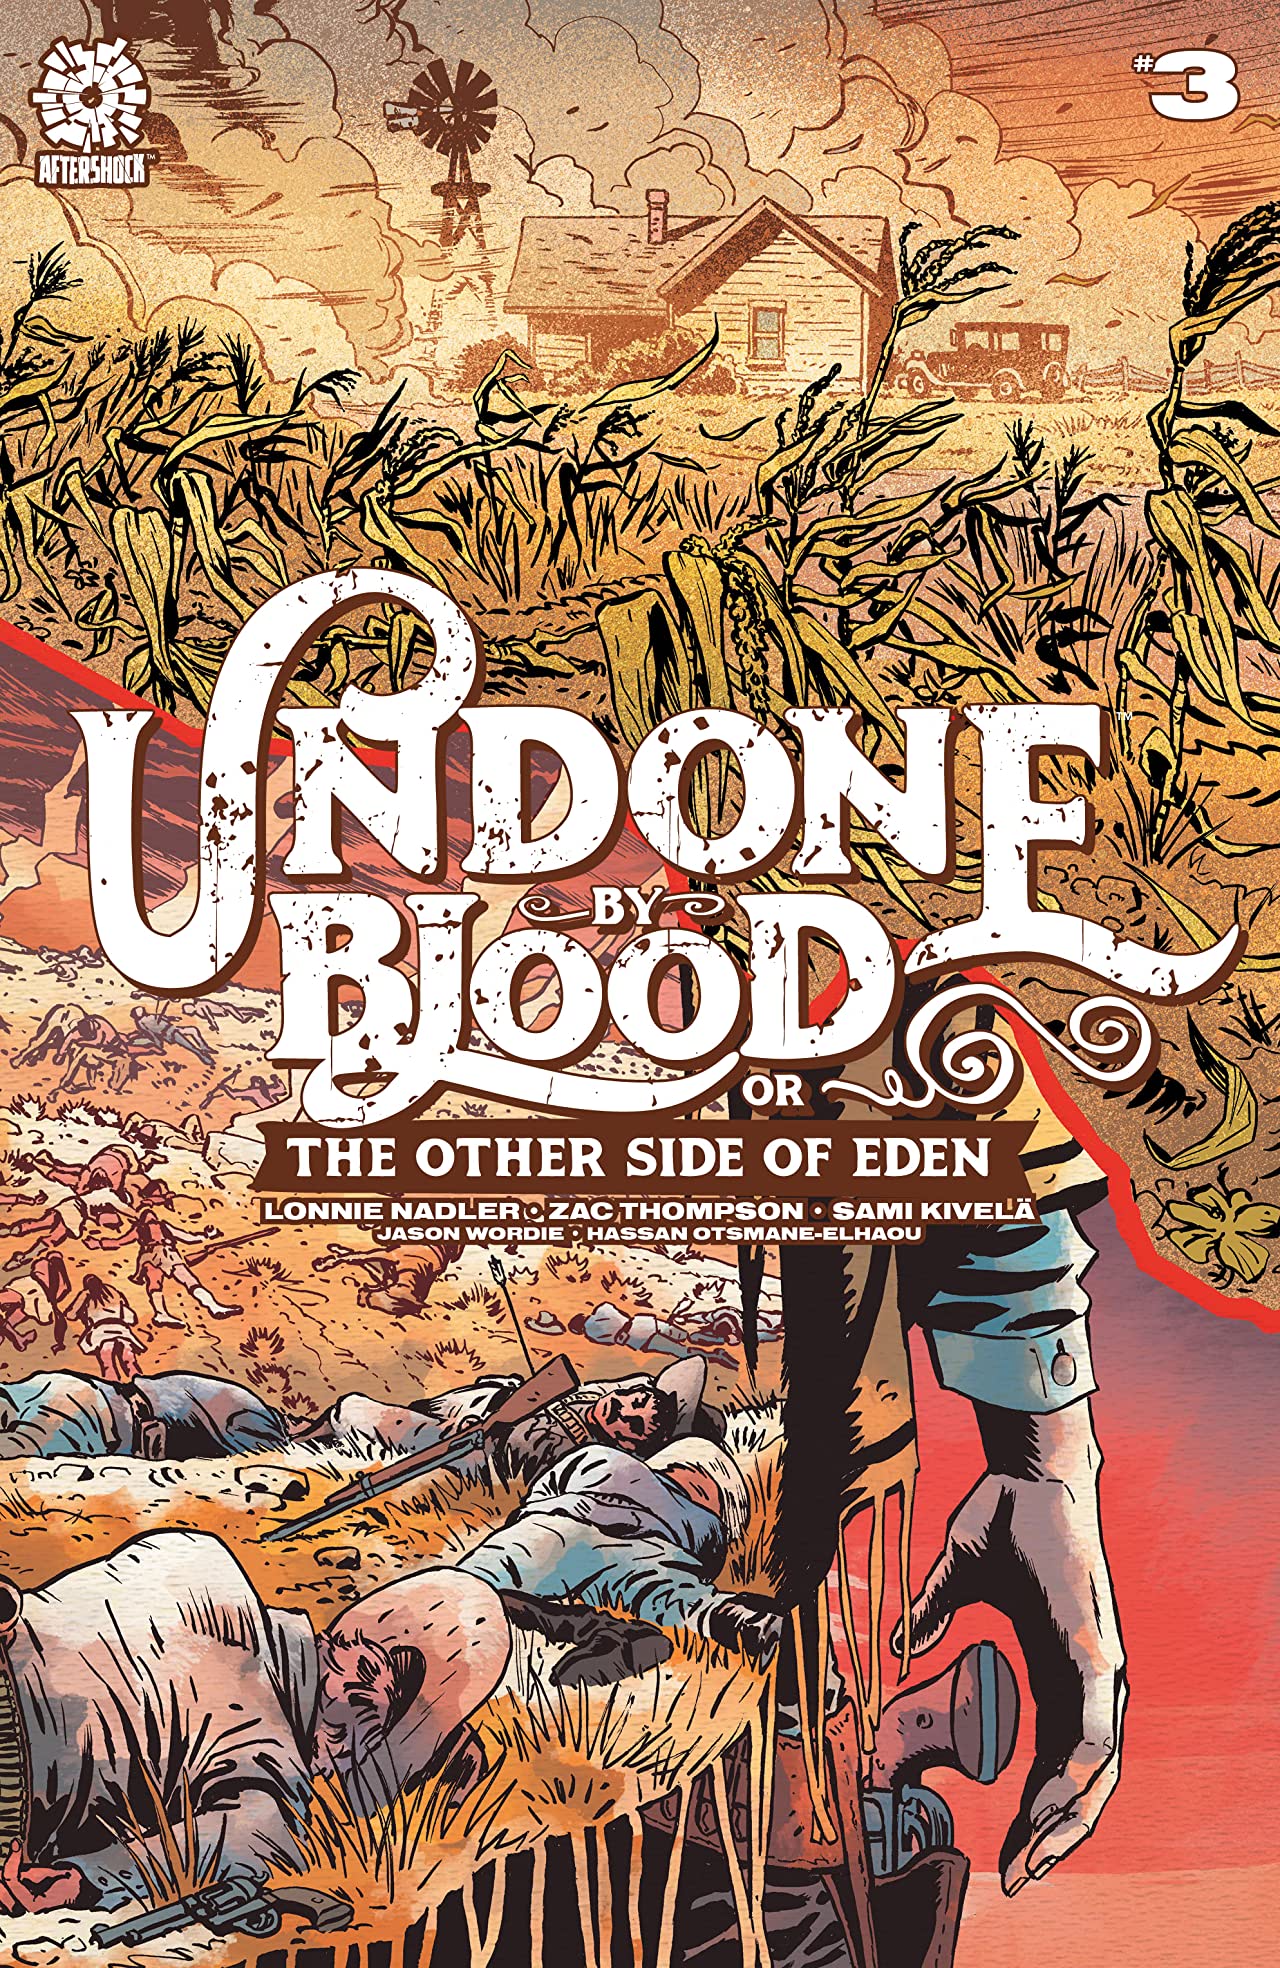 Undone By Blood or The Other Side of Eden #03